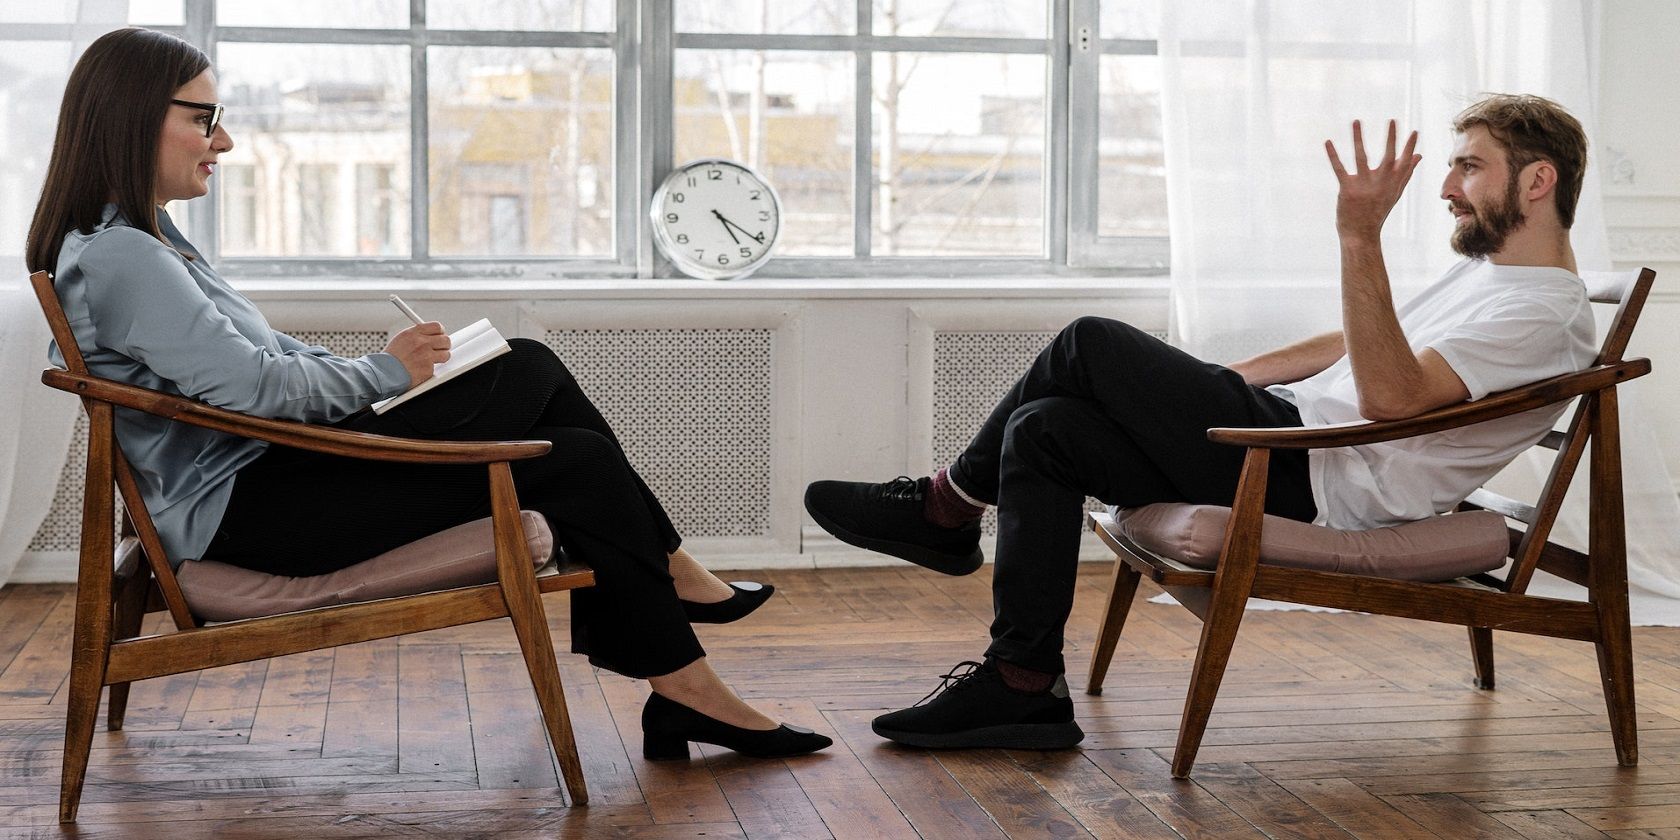 Image of a man and woman having a conversation sitting on chairs